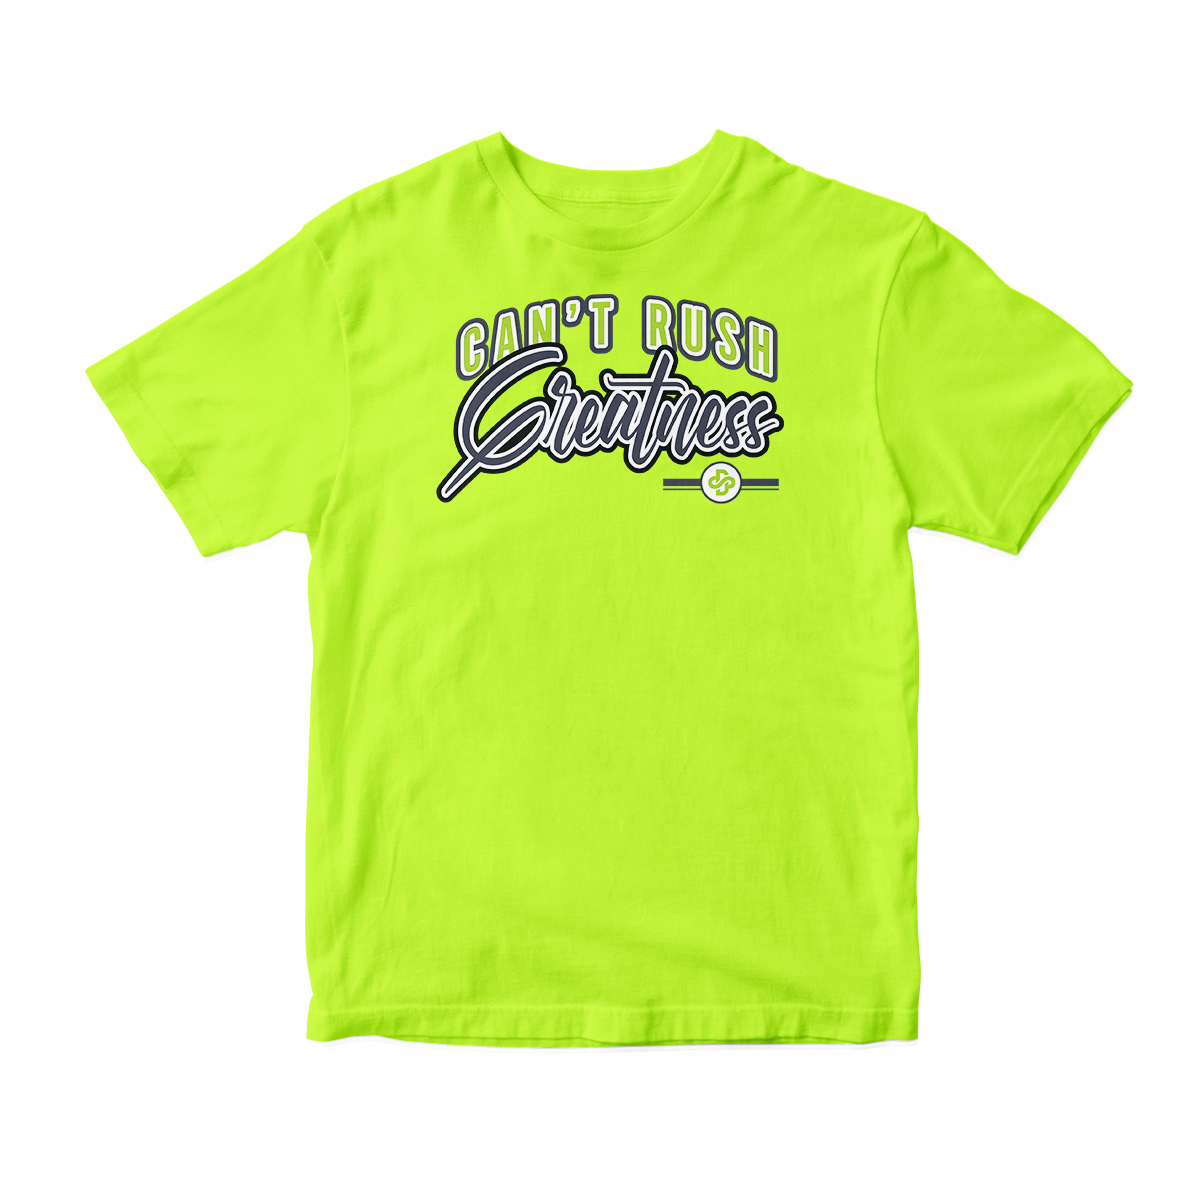 'Can't Rush Greatness' in Neon 4 CW Short Sleeve Tee